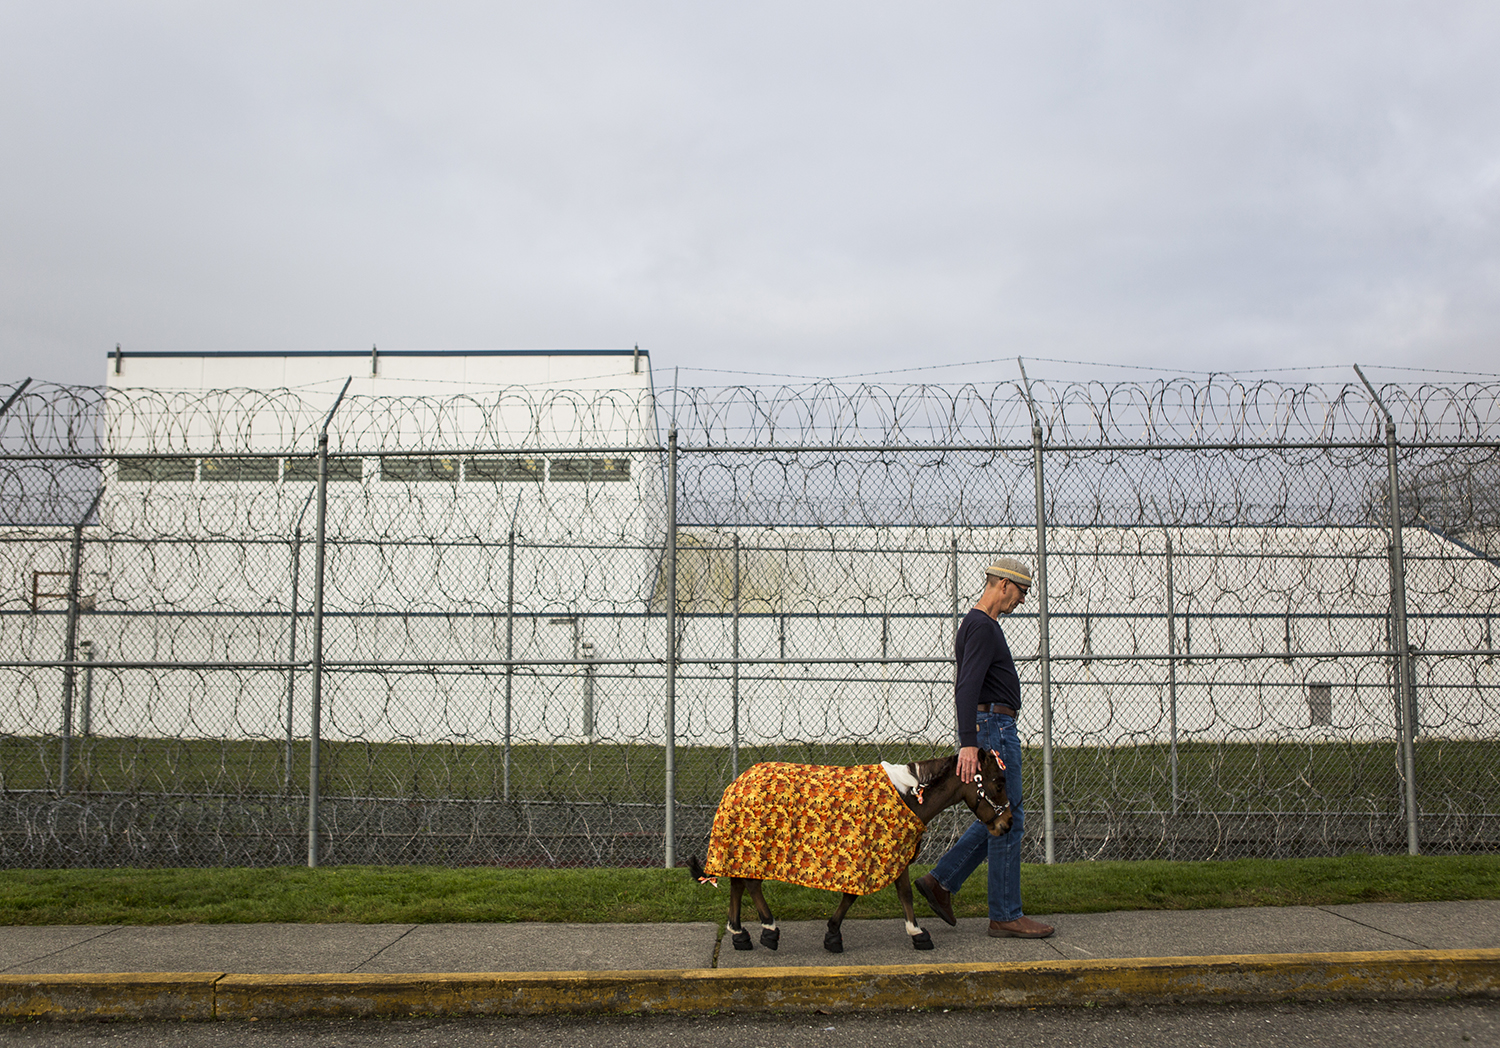  Triple B Foundation for Pet Therapy president Brian Hohstadt walks Streaker, the miniature pony, to the entrance of the Special Offenders Unit where he makes monthly visits to the inmates in the Monroe Correctional Complex on Tuesday, Oct. 30, 2018 